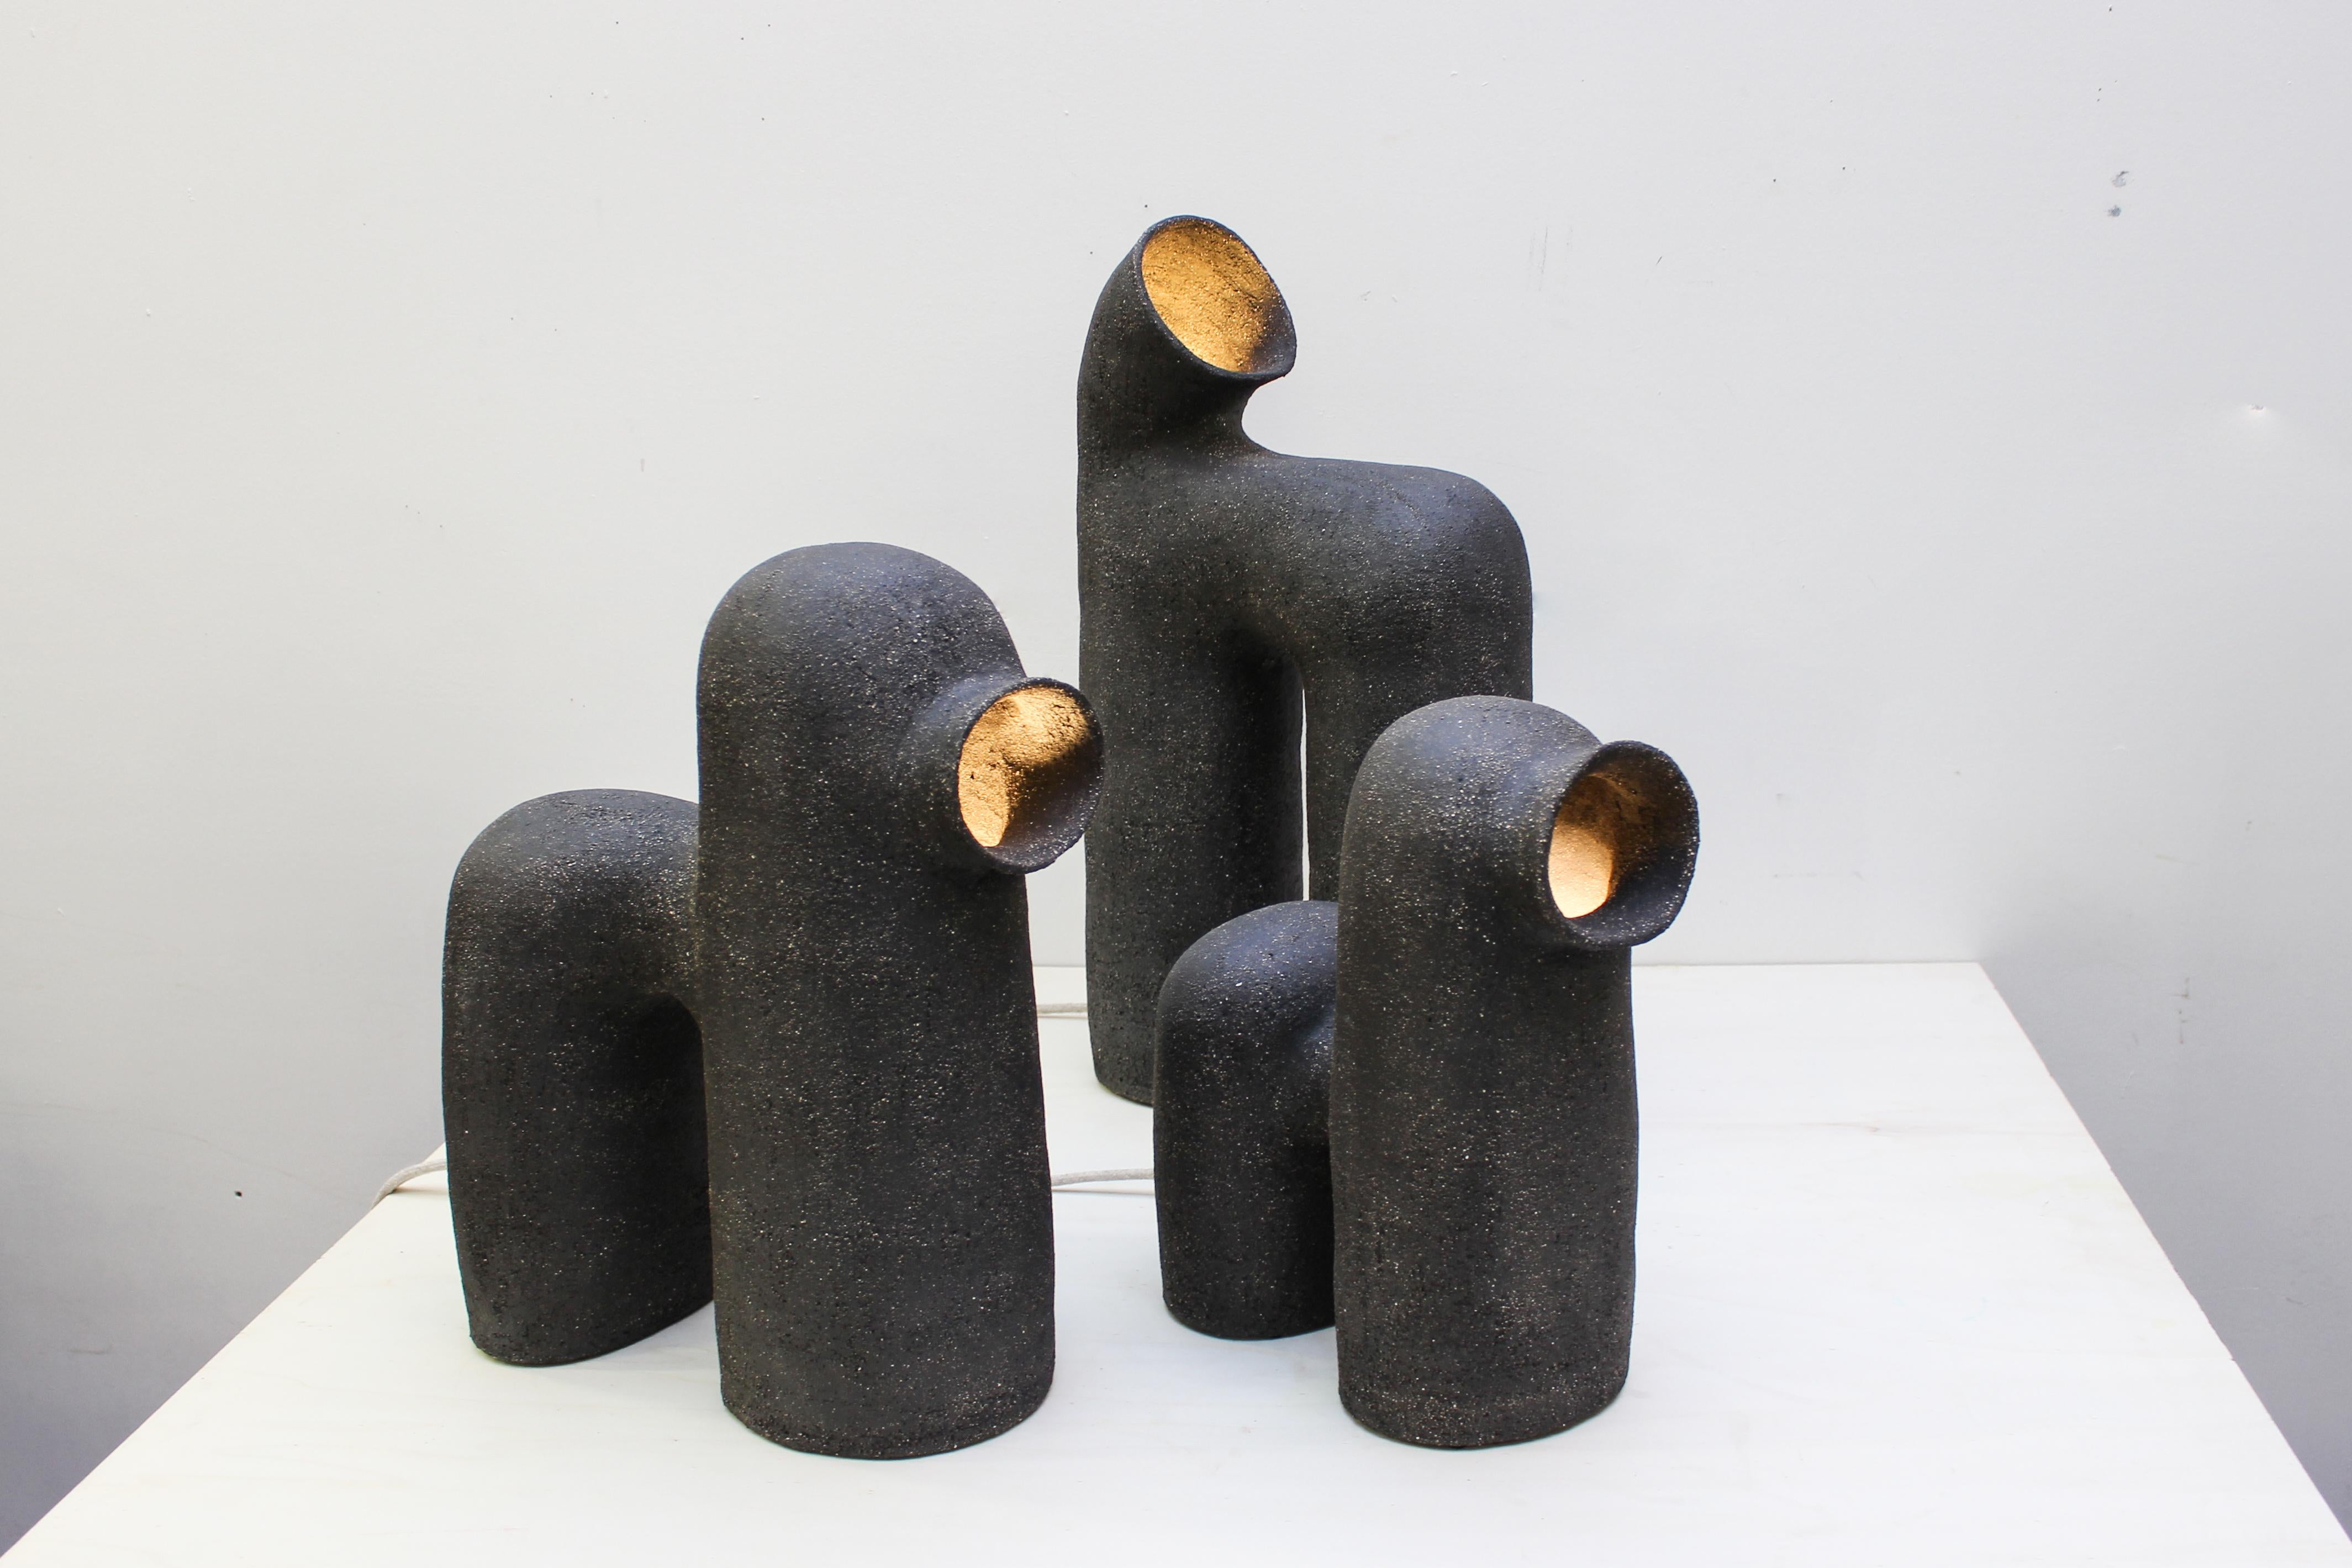 Set of 3 refuge black stoneware table lamp by Elisa Uberti
Materials: Black stoneware
Dimensions: Around 55/60cm

After fifteen years in fashion, Elisa Uberti decides to take the time to work with these hands and to give birth to new